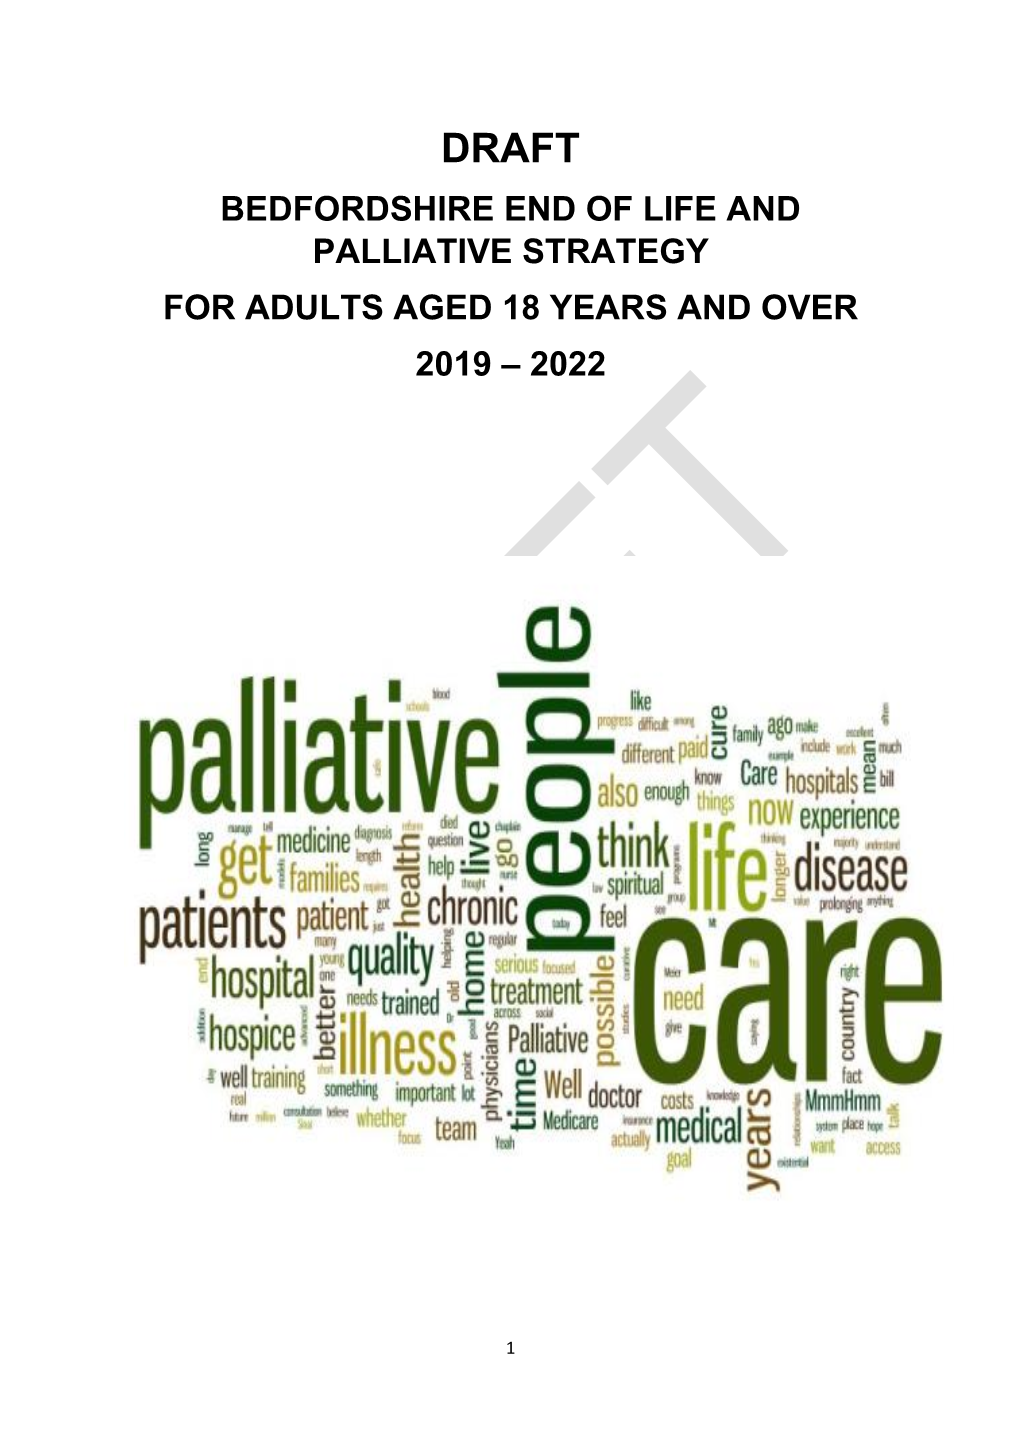 10.0B Bedfordshire End of Life and Palliative Strategy 2019